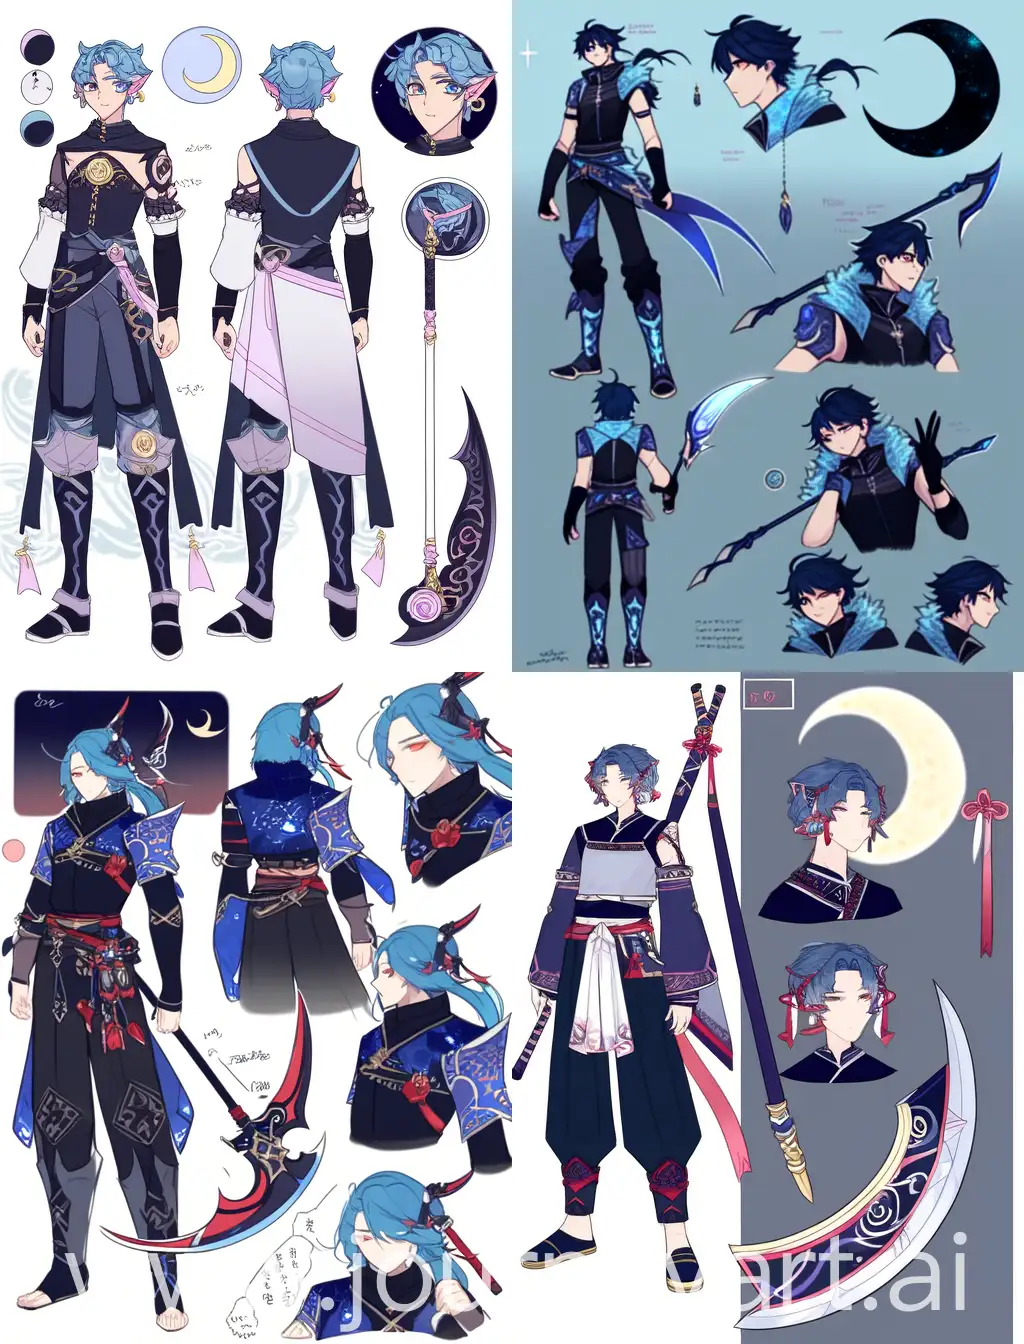 character sheet, beautiful anime guy, blue hair, square hairstyle, pink eyes, Slavic clothes, blue one, scythe weapon, moon and star patterns on clothes, concept art